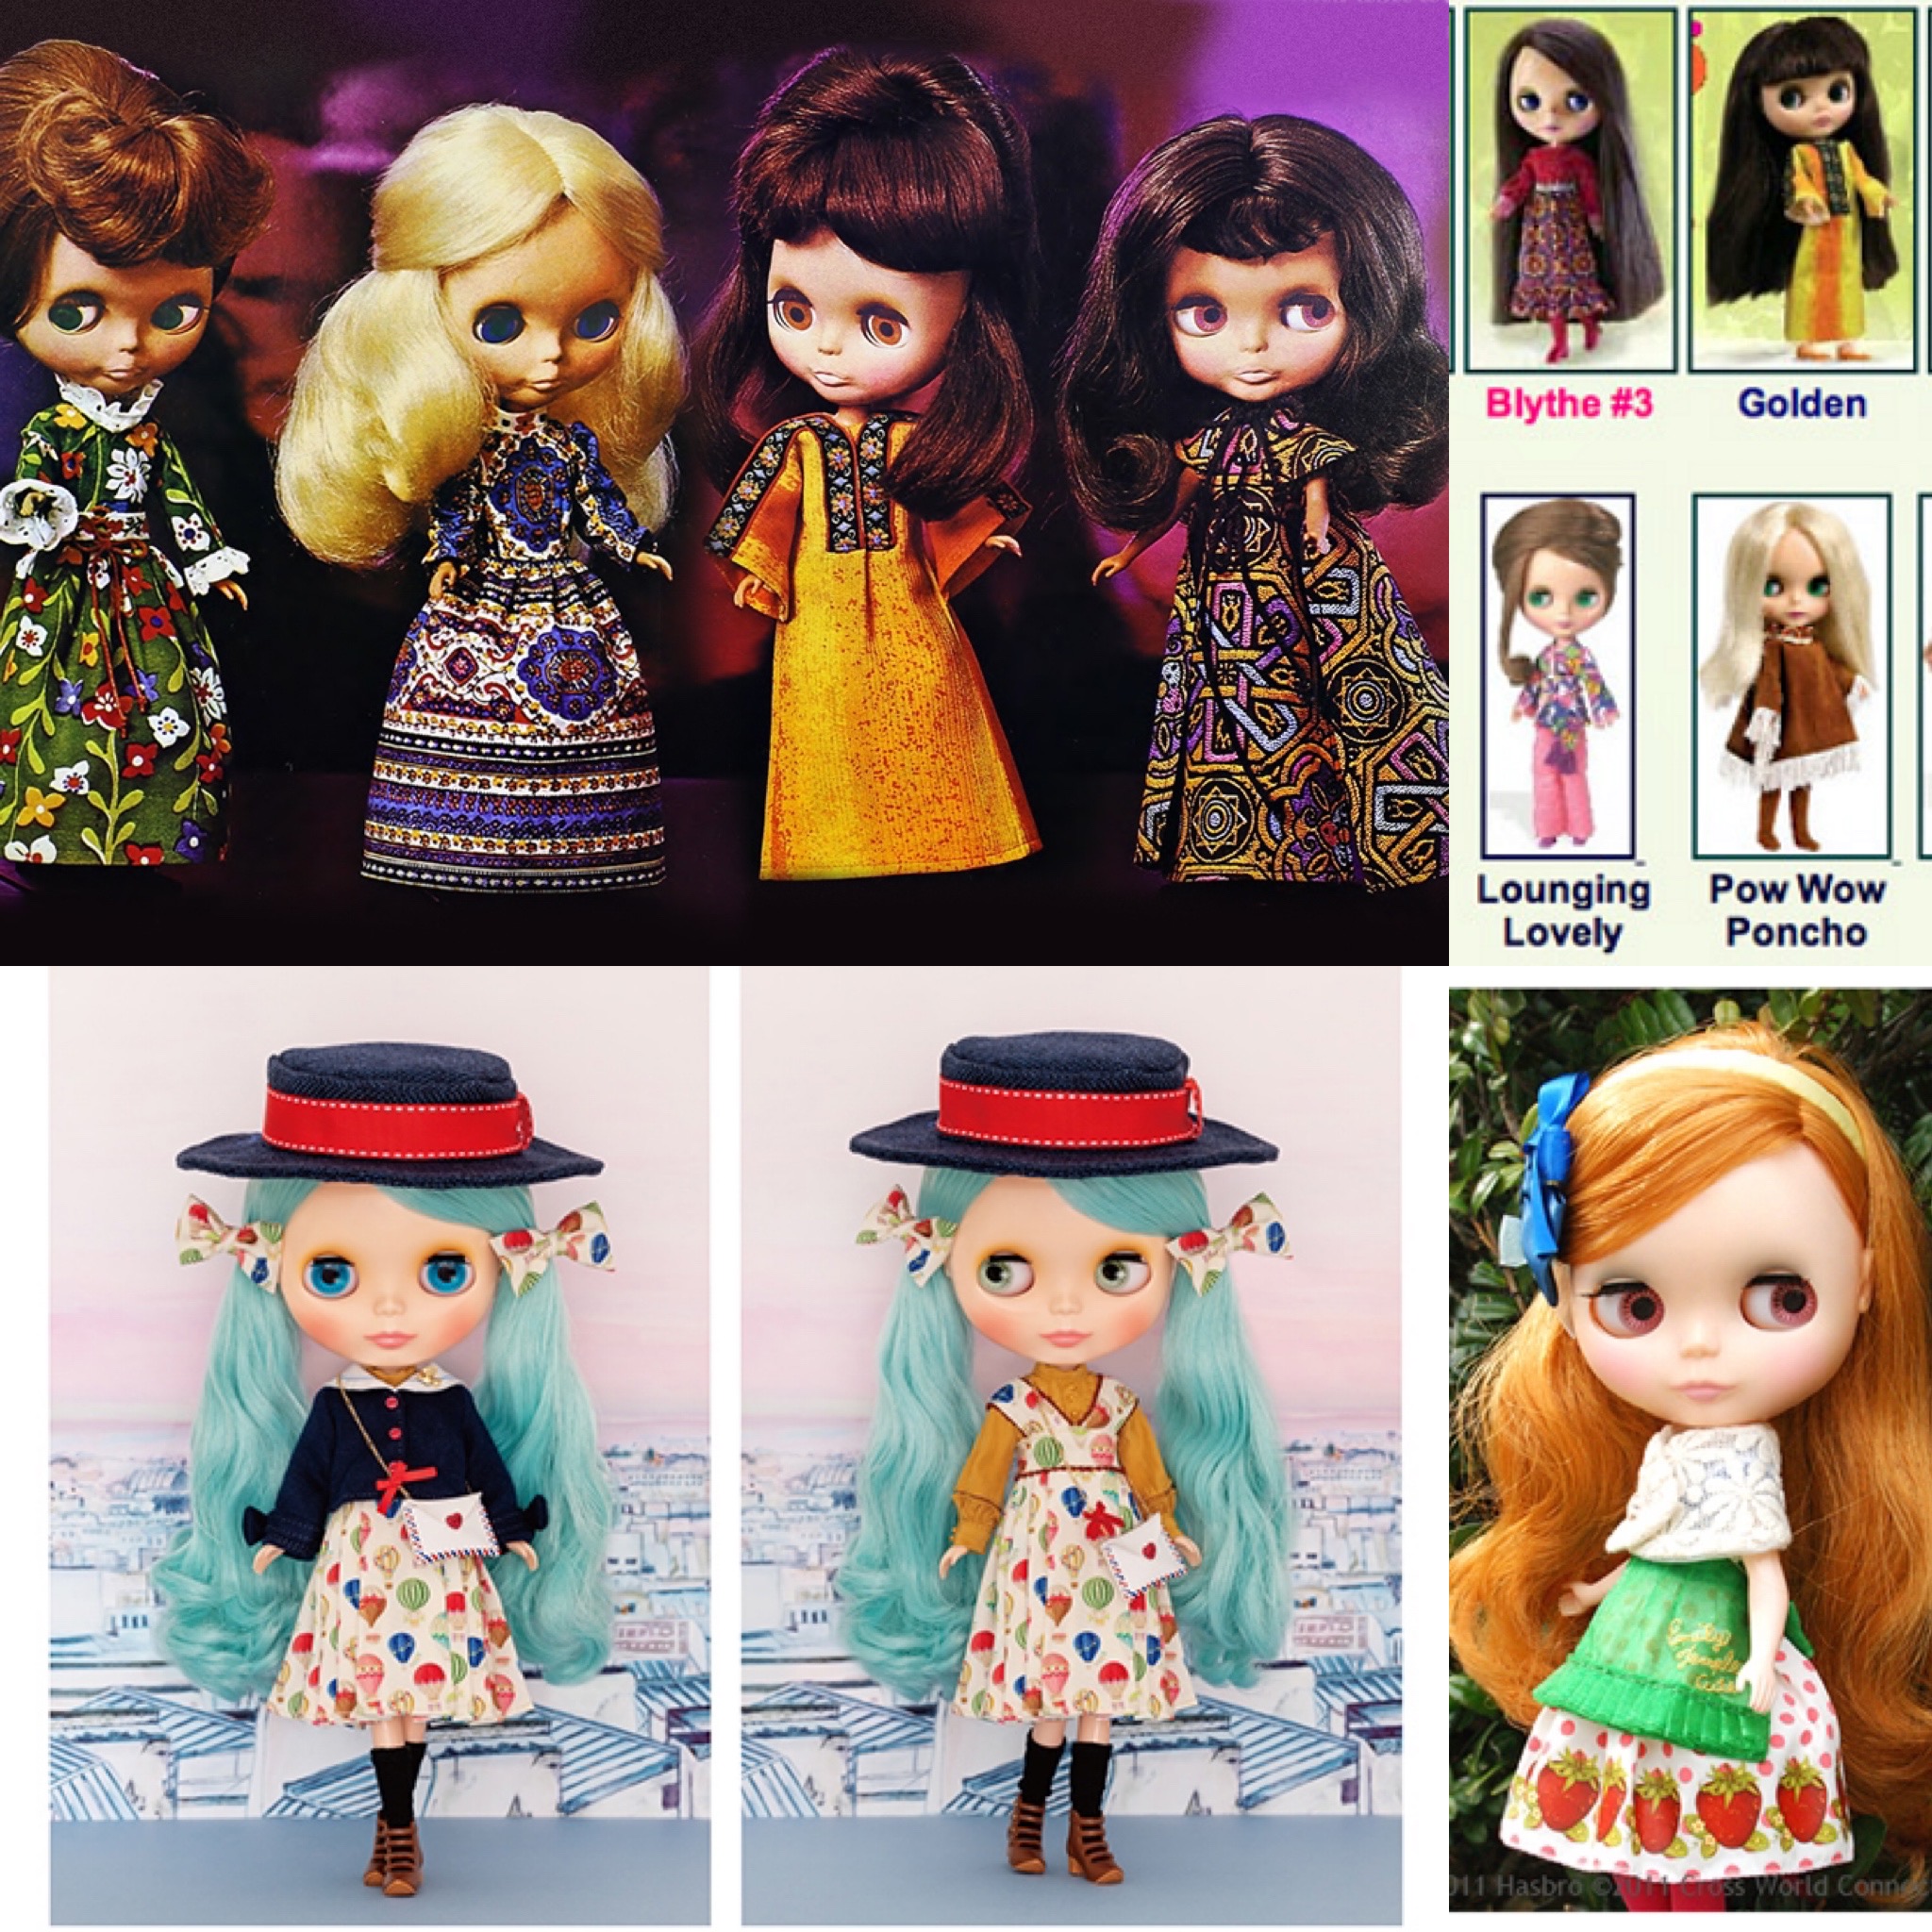 The most commonly collected Blythe dolls, Kenner, ADG, Takara, GSC